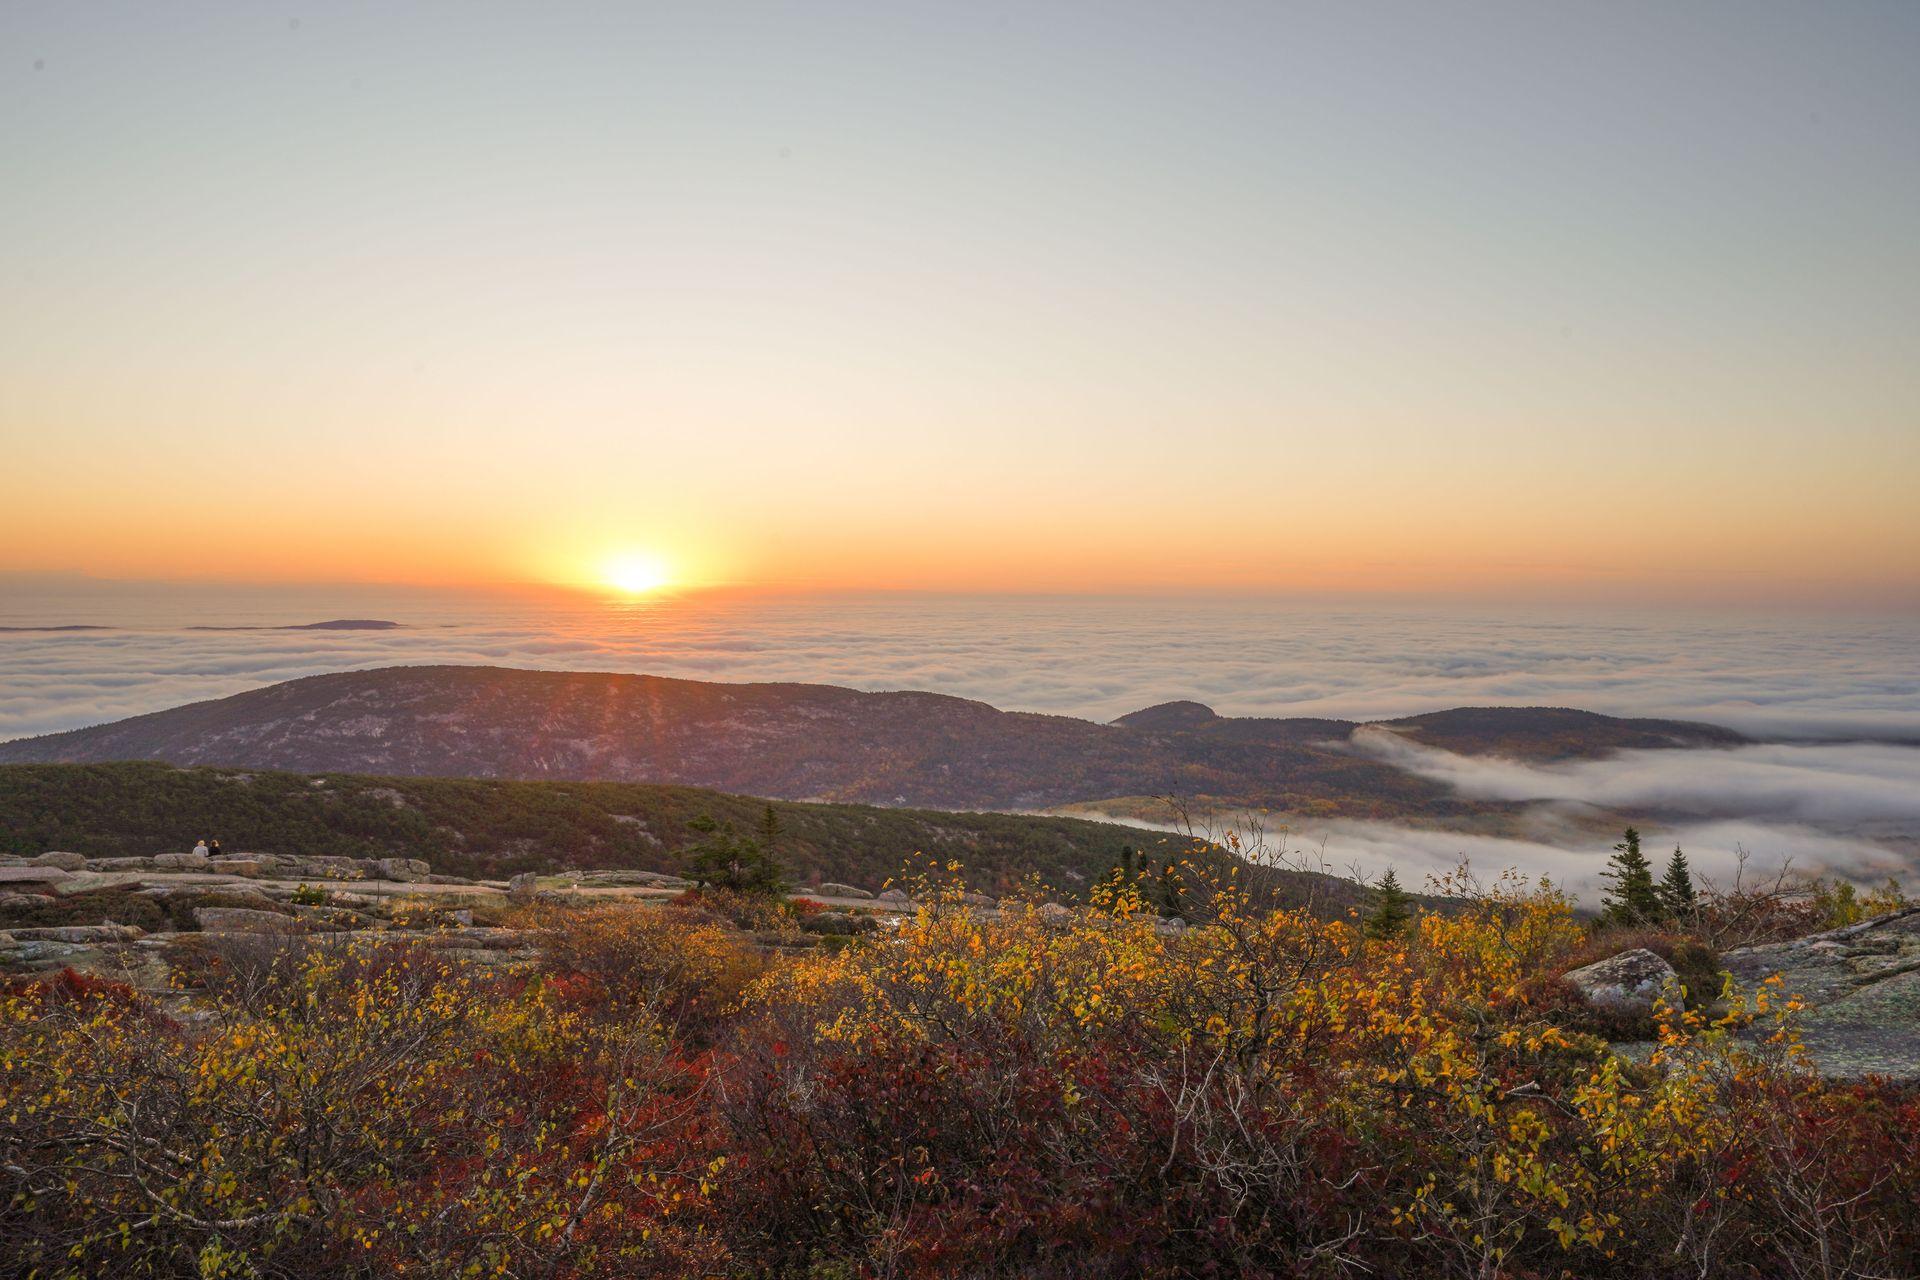 The sun rising over a cloud inversion from Cadillac Mountain.